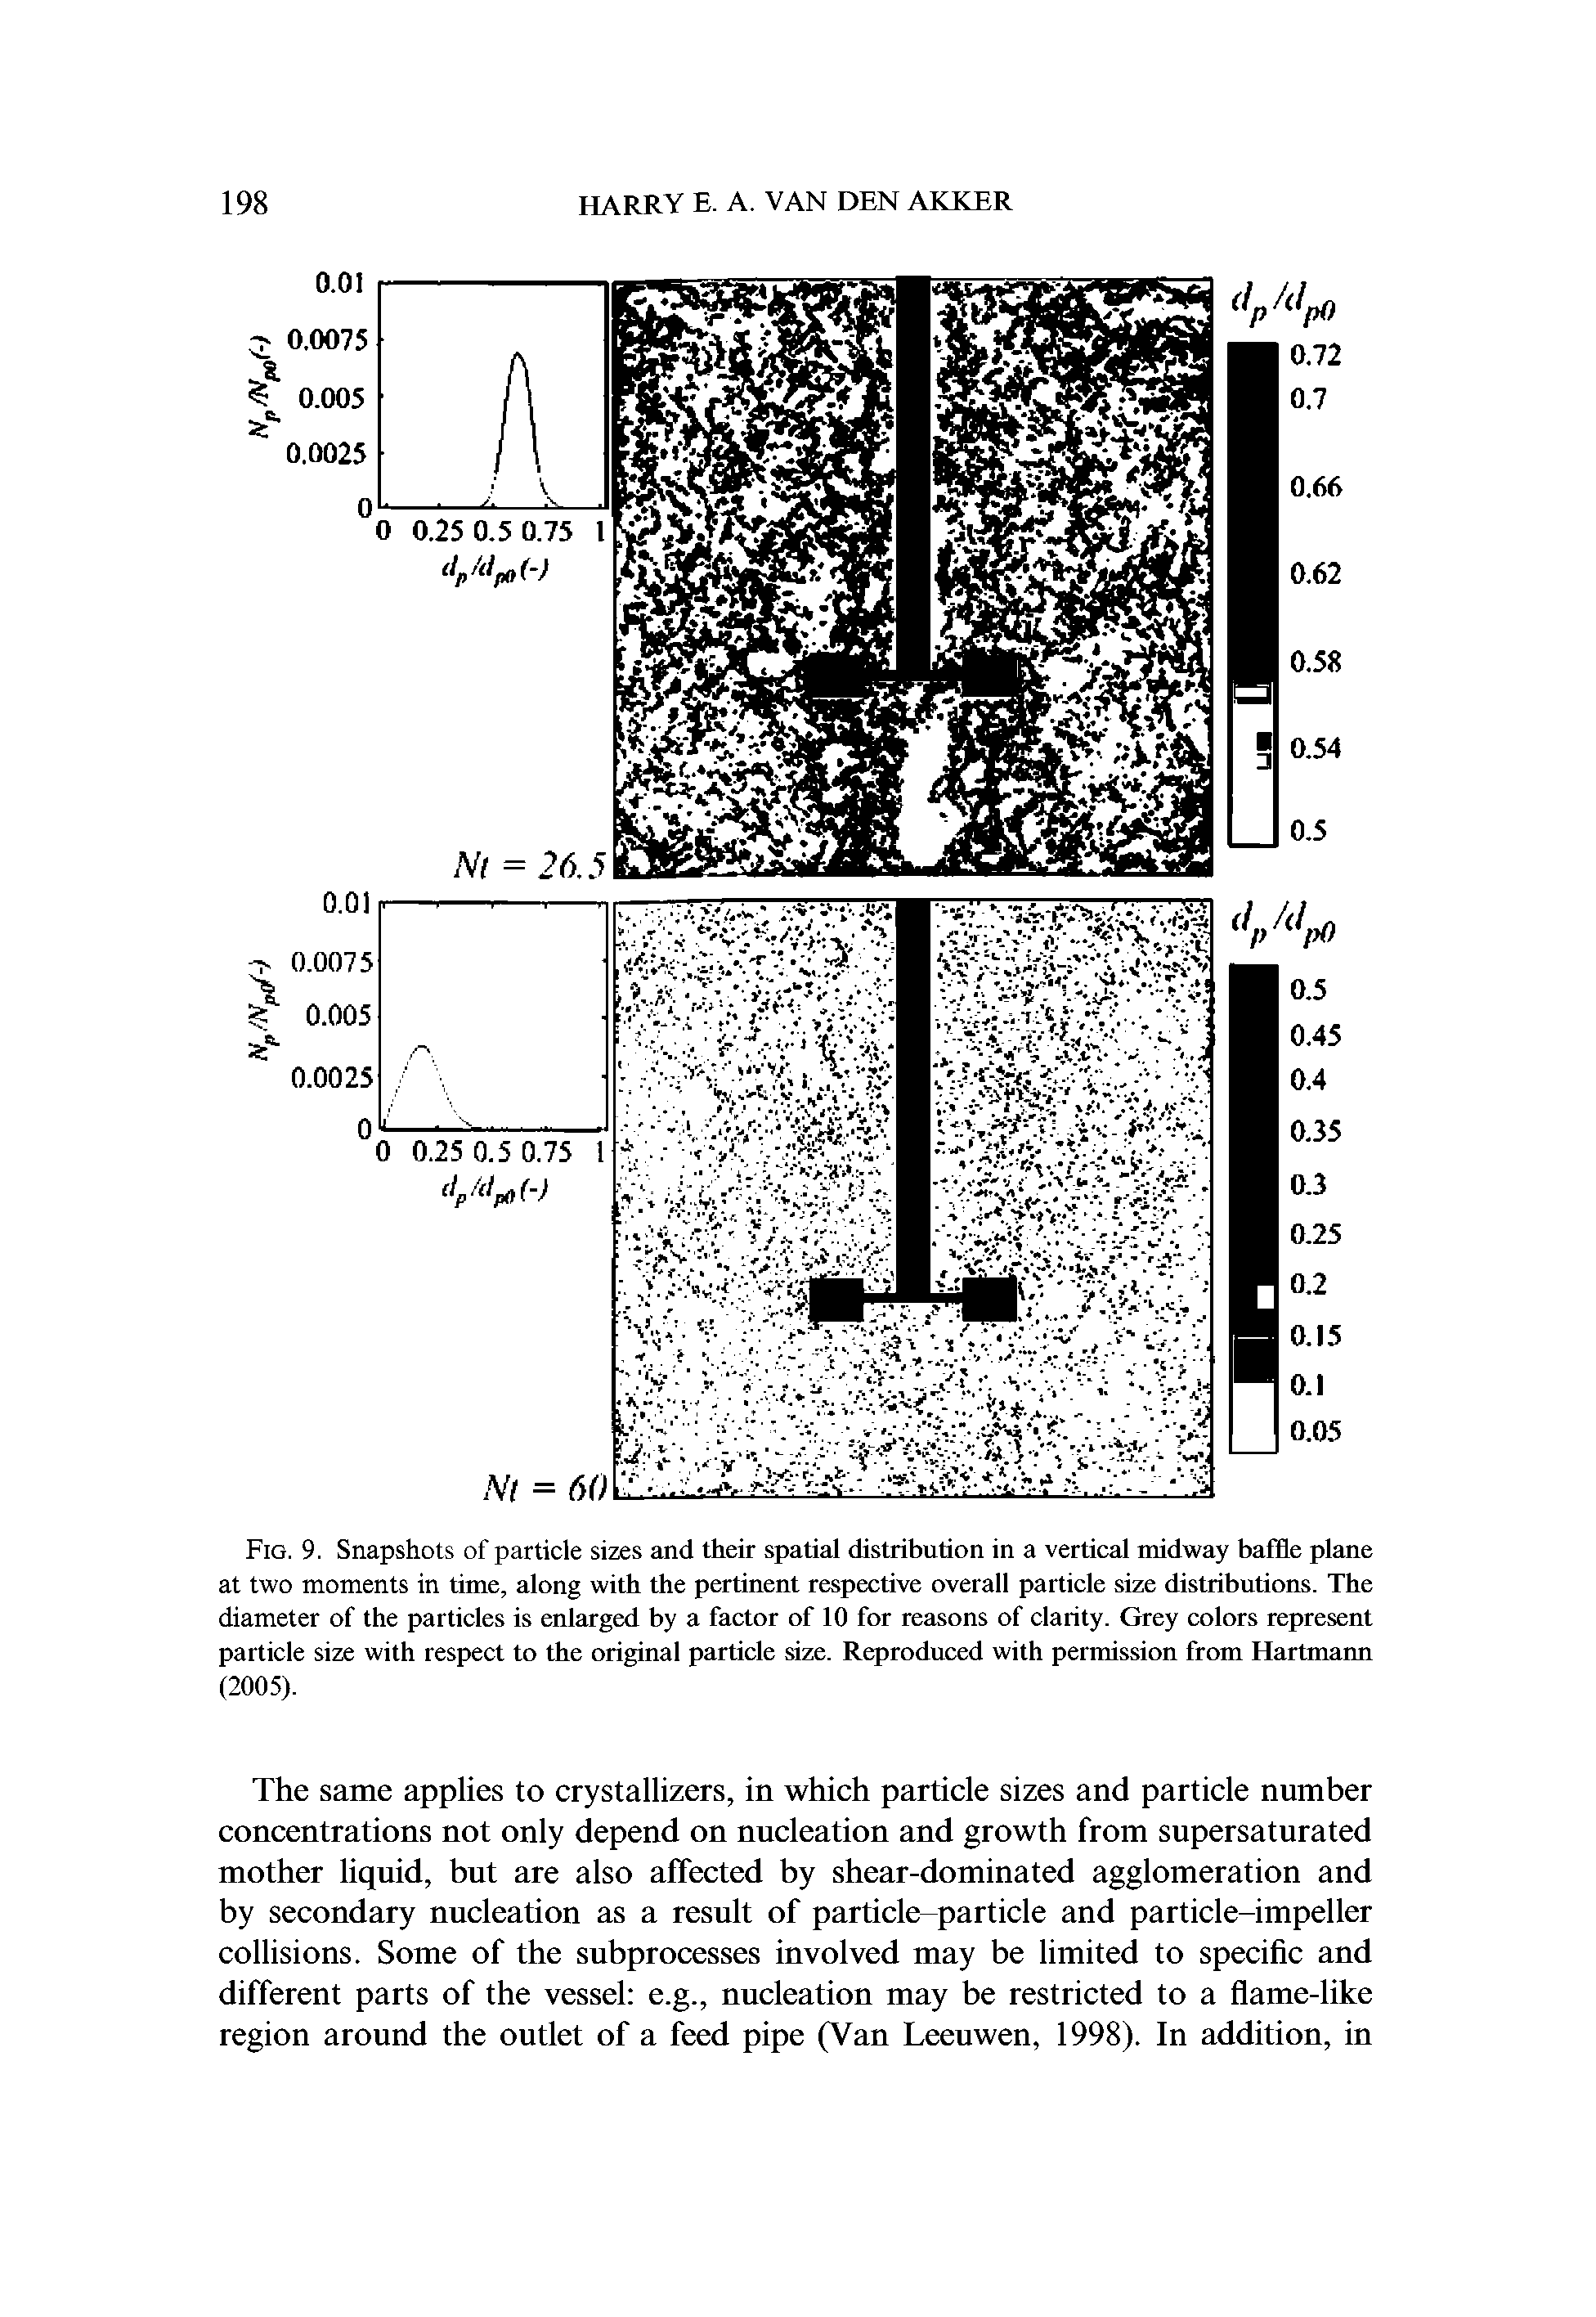 Fig. 9. Snapshots of particle sizes and their spatial distribution in a vertical midway baffle plane at two moments in time, along with the pertinent respective overall particle size distributions. The diameter of the particles is enlarged by a factor of 10 for reasons of clarity. Grey colors represent particle size with respect to the original particle size. Reproduced with permission from Hartmann (2005).